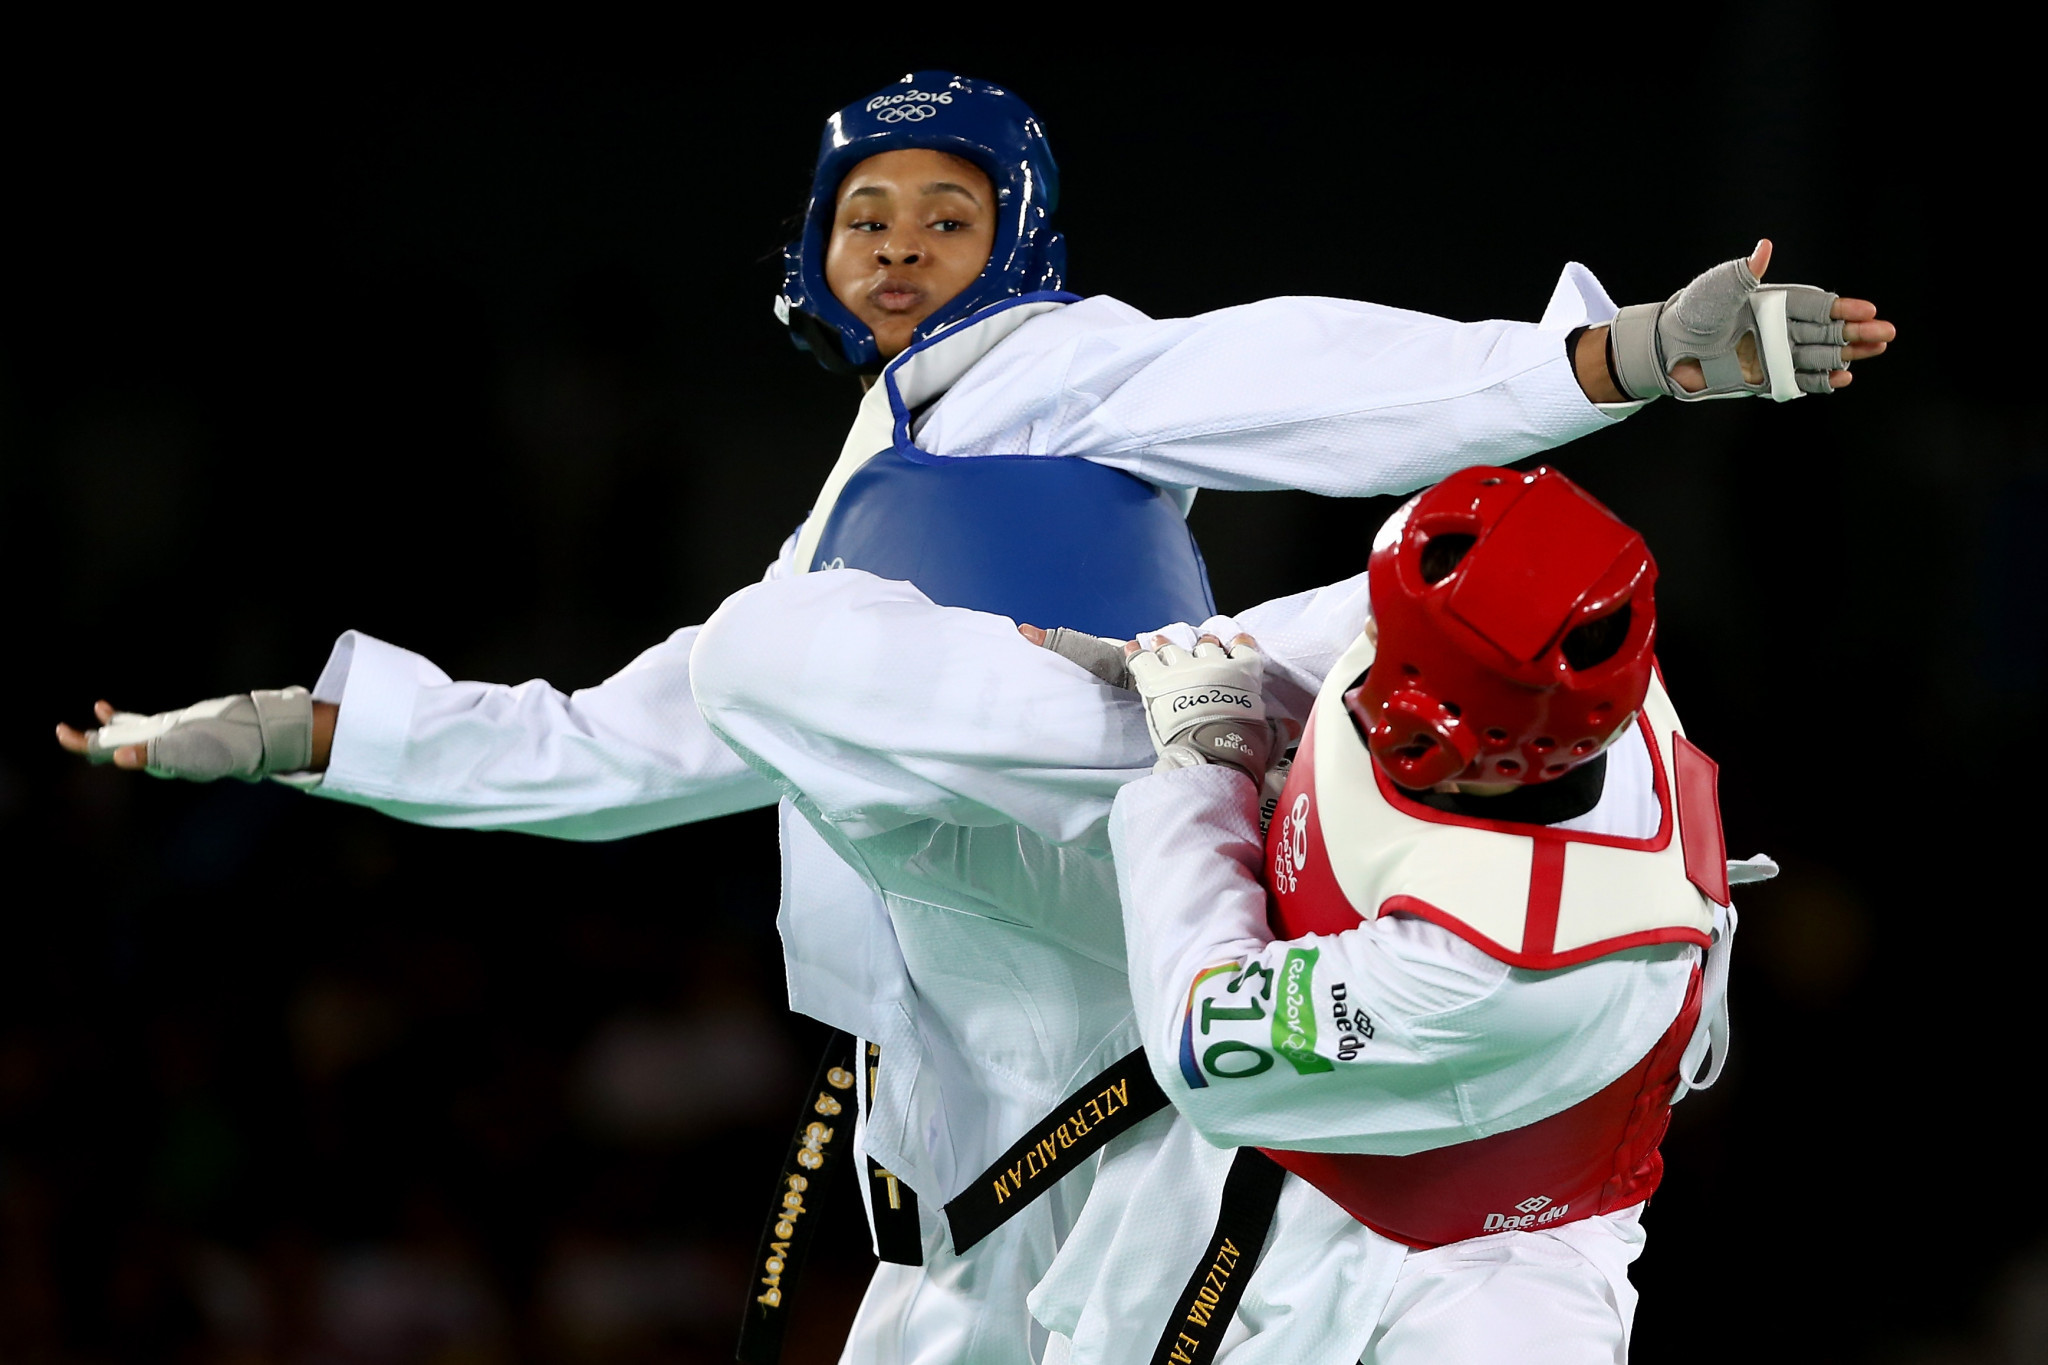 Paige McPherson of the United States will compete in the women’s -67 kg class at this year's World Taekwondo Championships ©Getty Images